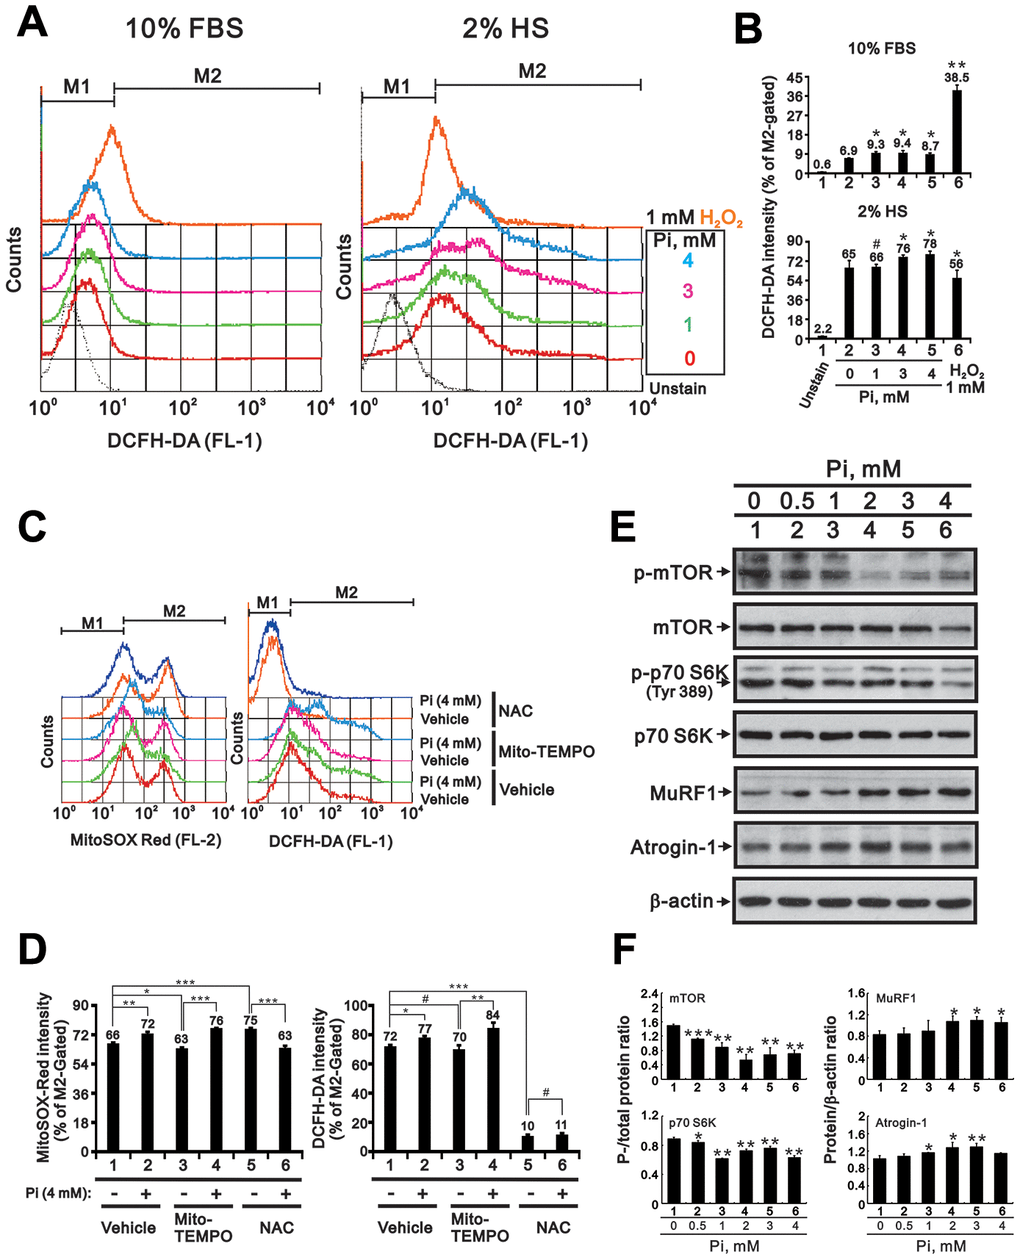 High Pi induces ROS generation in differentiated C2C12 cells. (A) Analysis of cytosolic ROS levels via H2DCFDA flow cytometry in proliferating (10% FBS) and differentiated (2% HS) C2C12 cells treated with the indicated concentrations of Pi for 24 h. (B) Bar graph summarizing the data from panel A. Cells exposed to 1 mM H2O2 served as positive control. *P C) Assessment of mitochondrial and cytosolic ROS levels via MitoSOX Red and H2DCFDA flow cytometry. Differentiated C2C12 cells were treated for 24 h with 4 mM Pi plus the mitochondria-targeted ROS scavenger Mito-TEMPO (10 μM) or the cytosolic ROS scavenger NAC (10 mM). (D) Bar graph summarizing the data from panel (C). *P E) Representative immunoblot and (F) densitometric analyses of protein synthesis (mTOR and S6K) and degradation (MuRF1 and atrogin-1) markers in 3-day-differentiated C2C12 cells treated for 24 h with the indicated concentrations of Pi. *P #P > 0.05. Data are presented as means ± SEM.